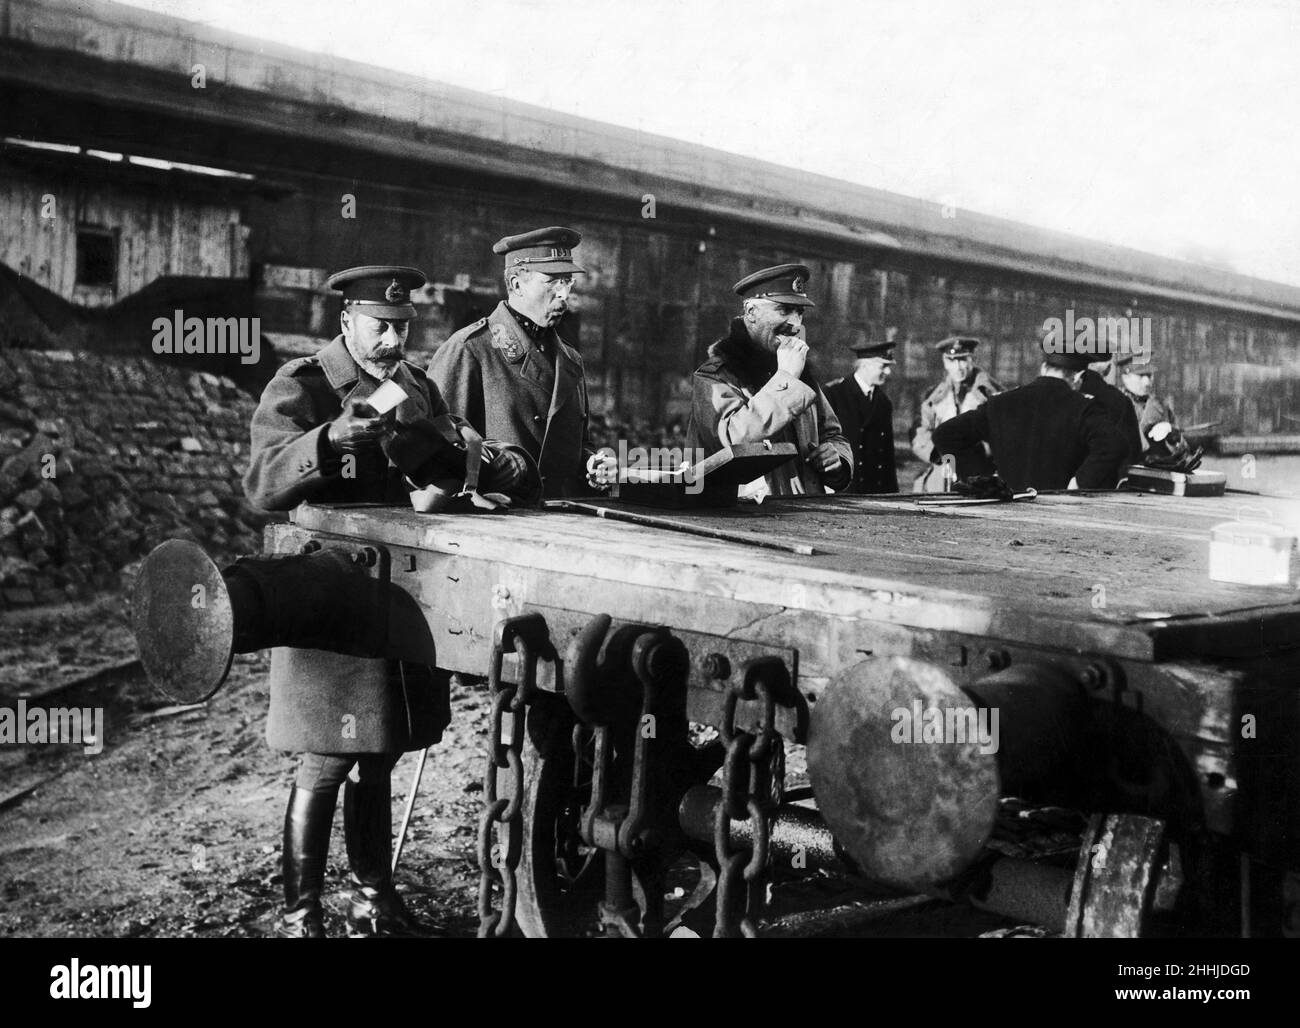 King George V, King Albert of Belgium and several staff officers stop for an impromptu lunch on a railway truck at Zeebrugge, France, Daily Mirror 18th December 1918. Published Photograph. World War One. Stock Photo